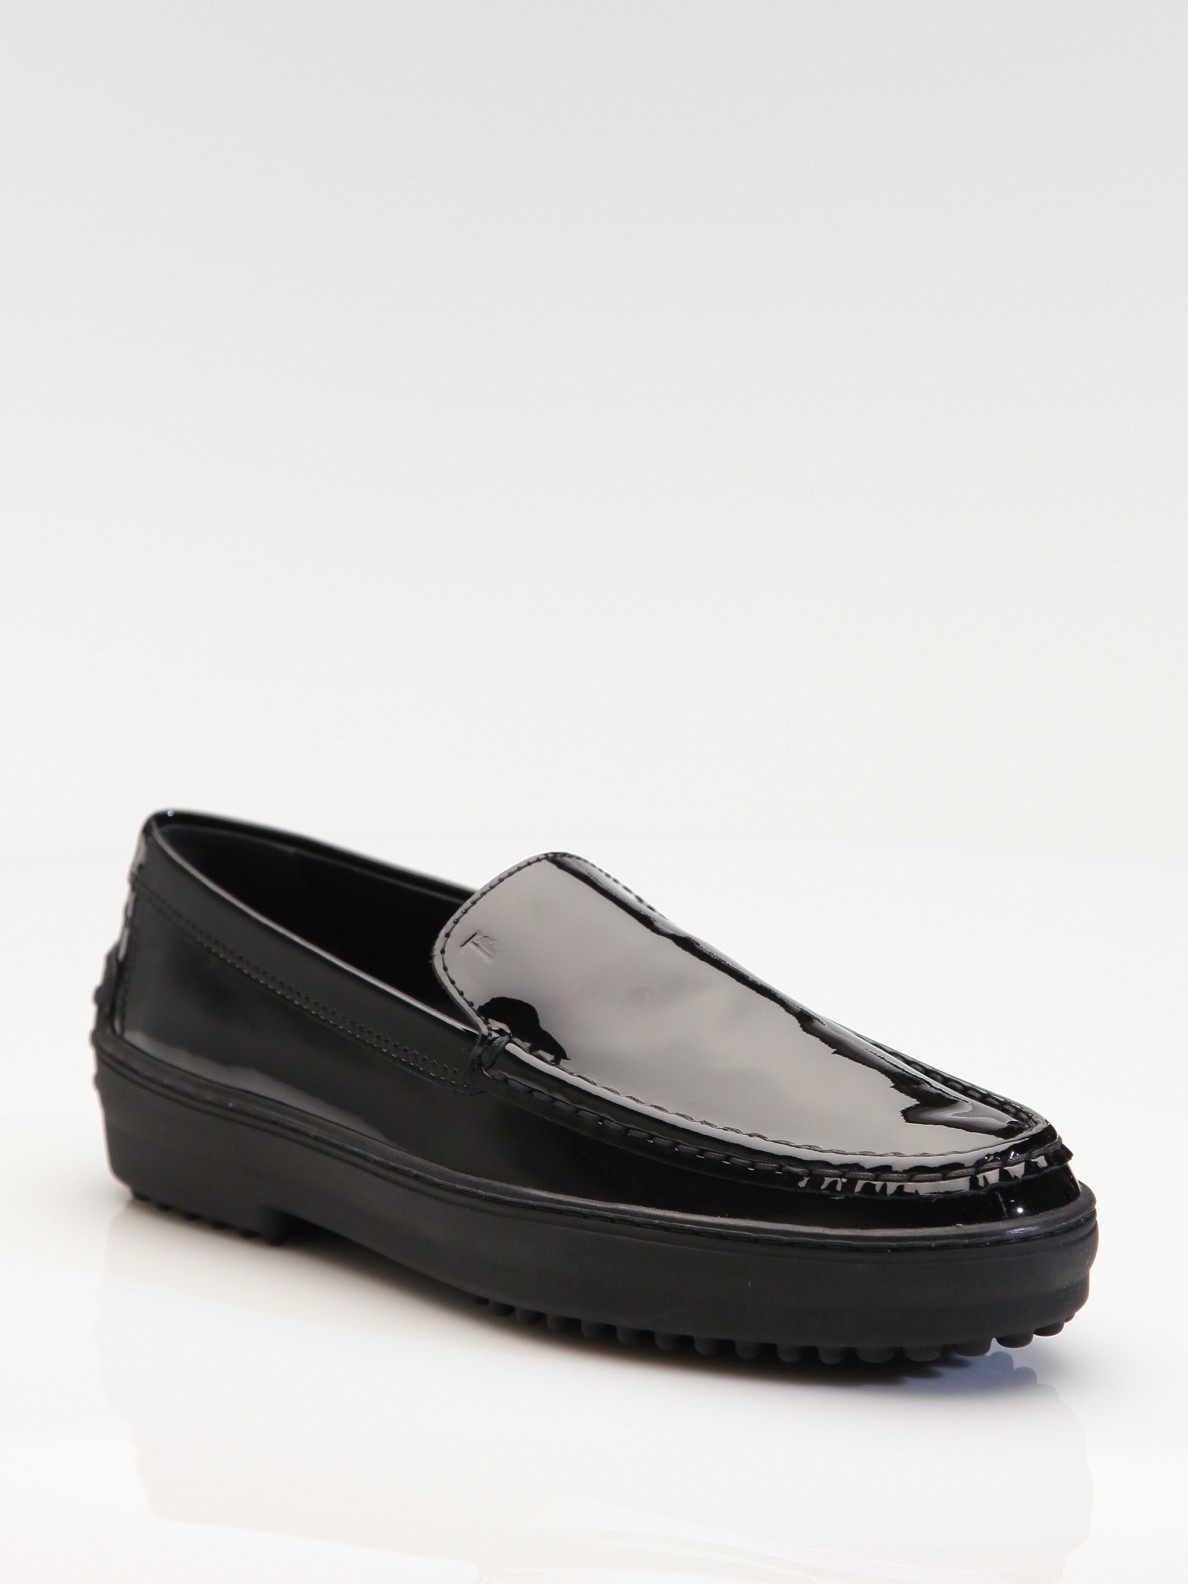 Tod's Patent Leather Loafers in Black - Lyst